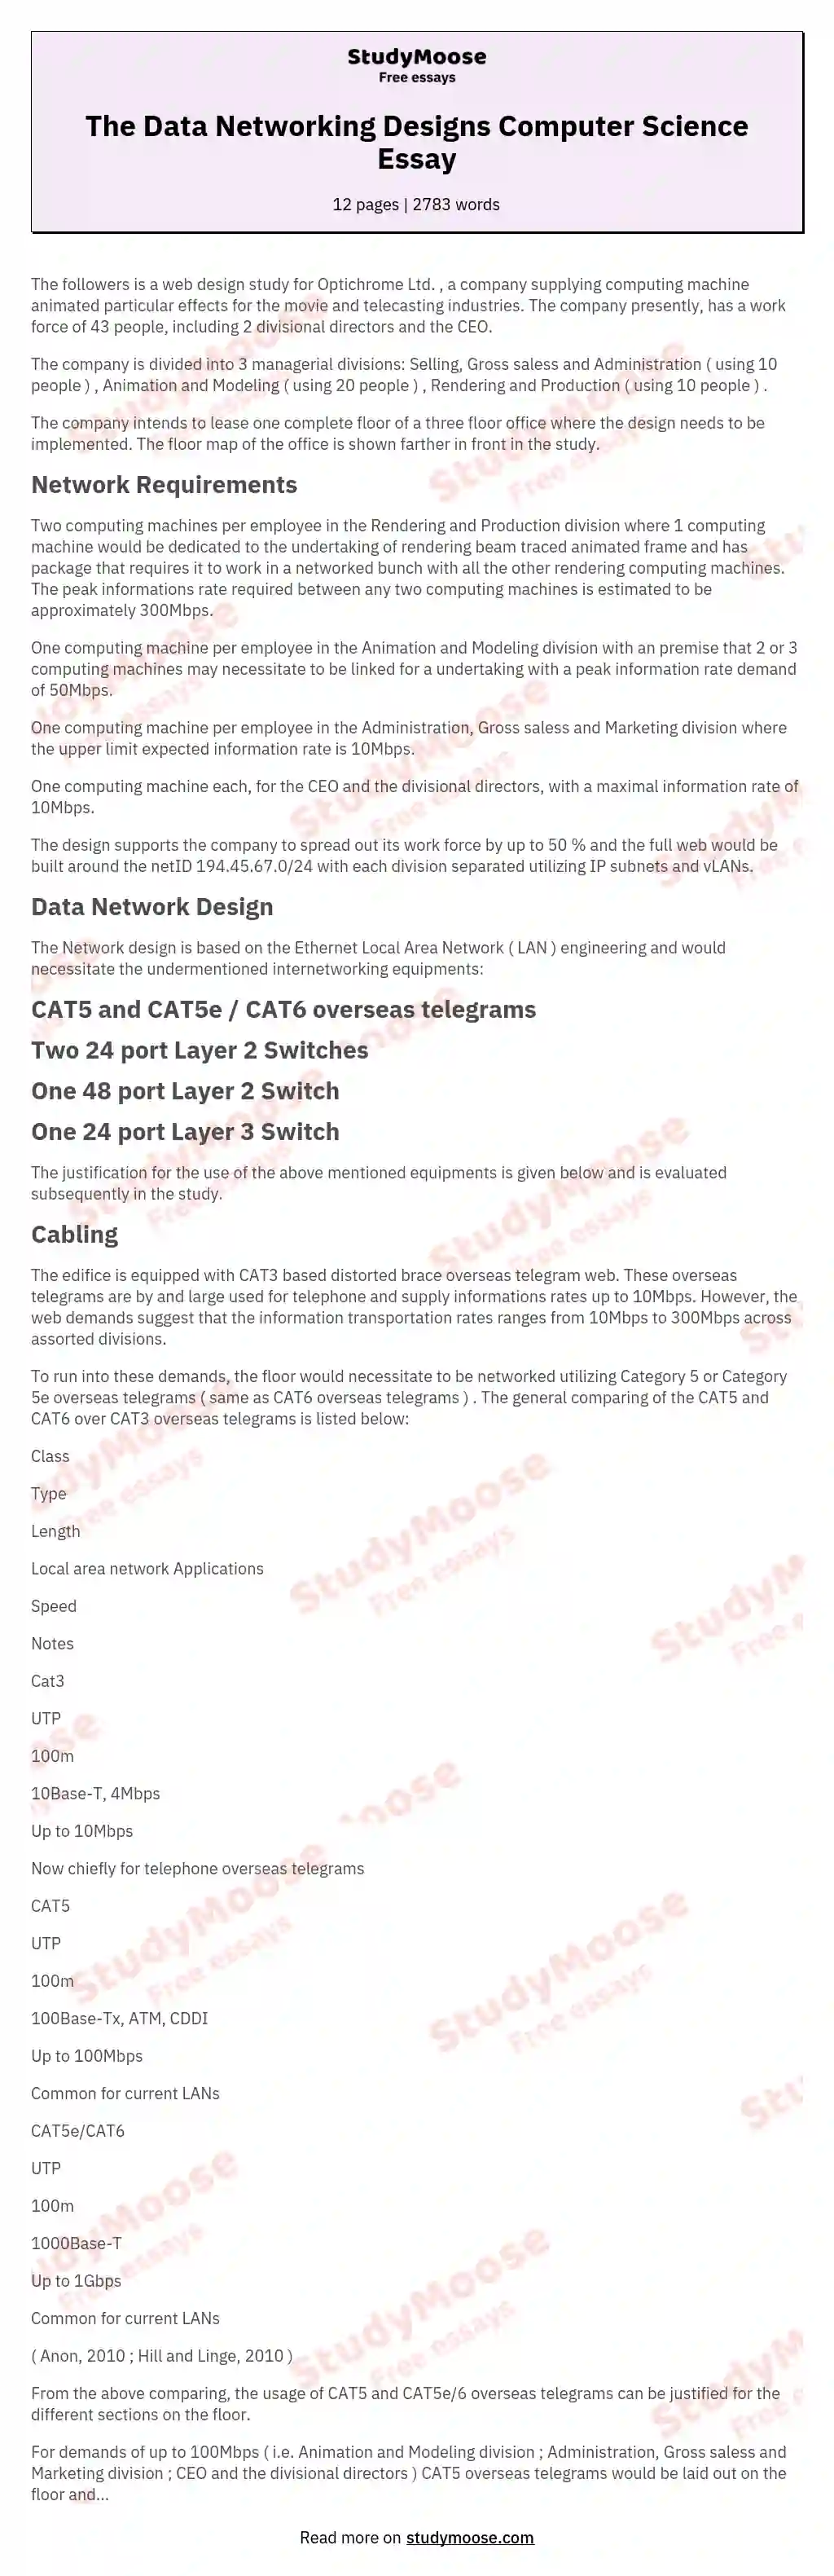 The Data Networking Designs Computer Science Essay essay